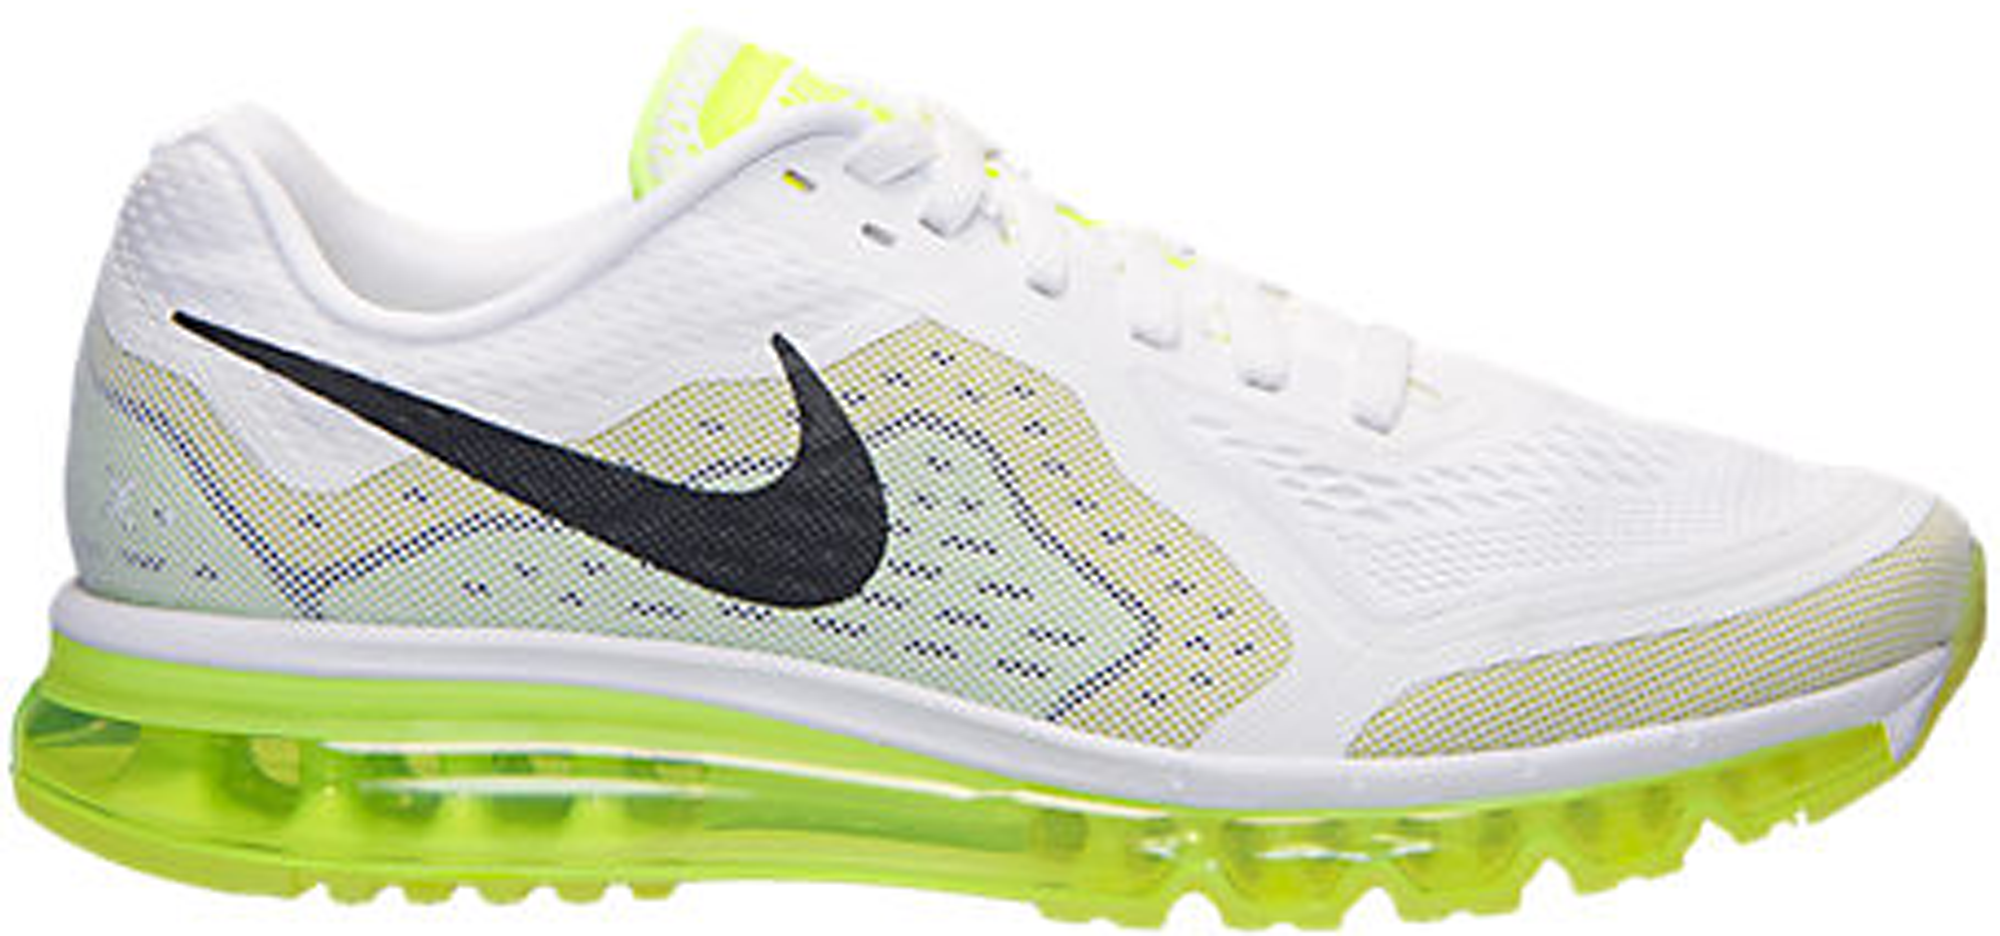 nike air max 2014 limited edition